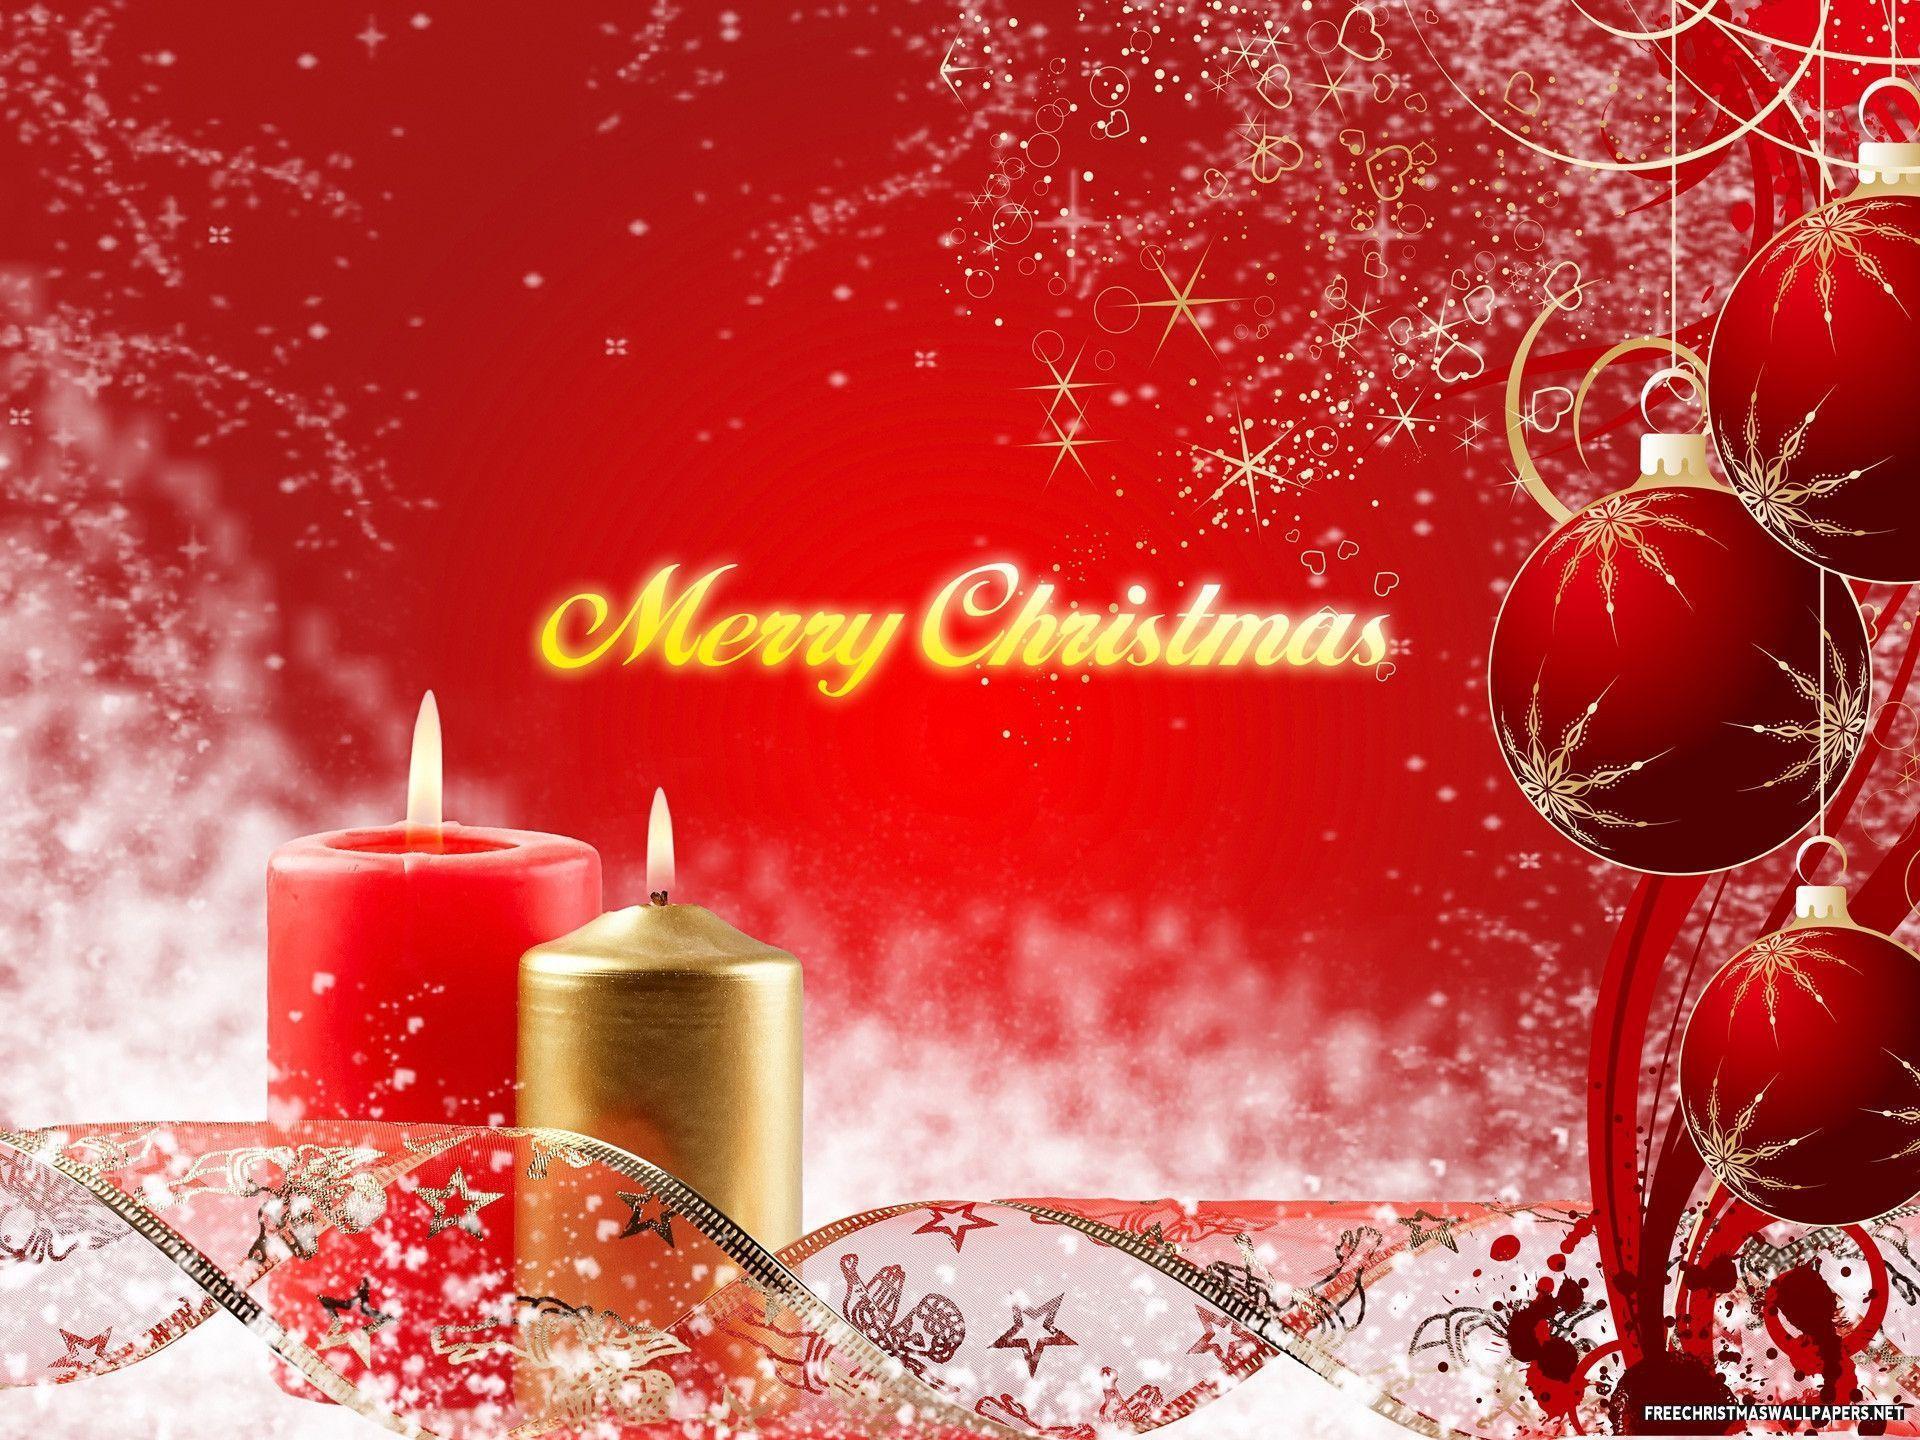 Merry Christmas Candles Wallpaper